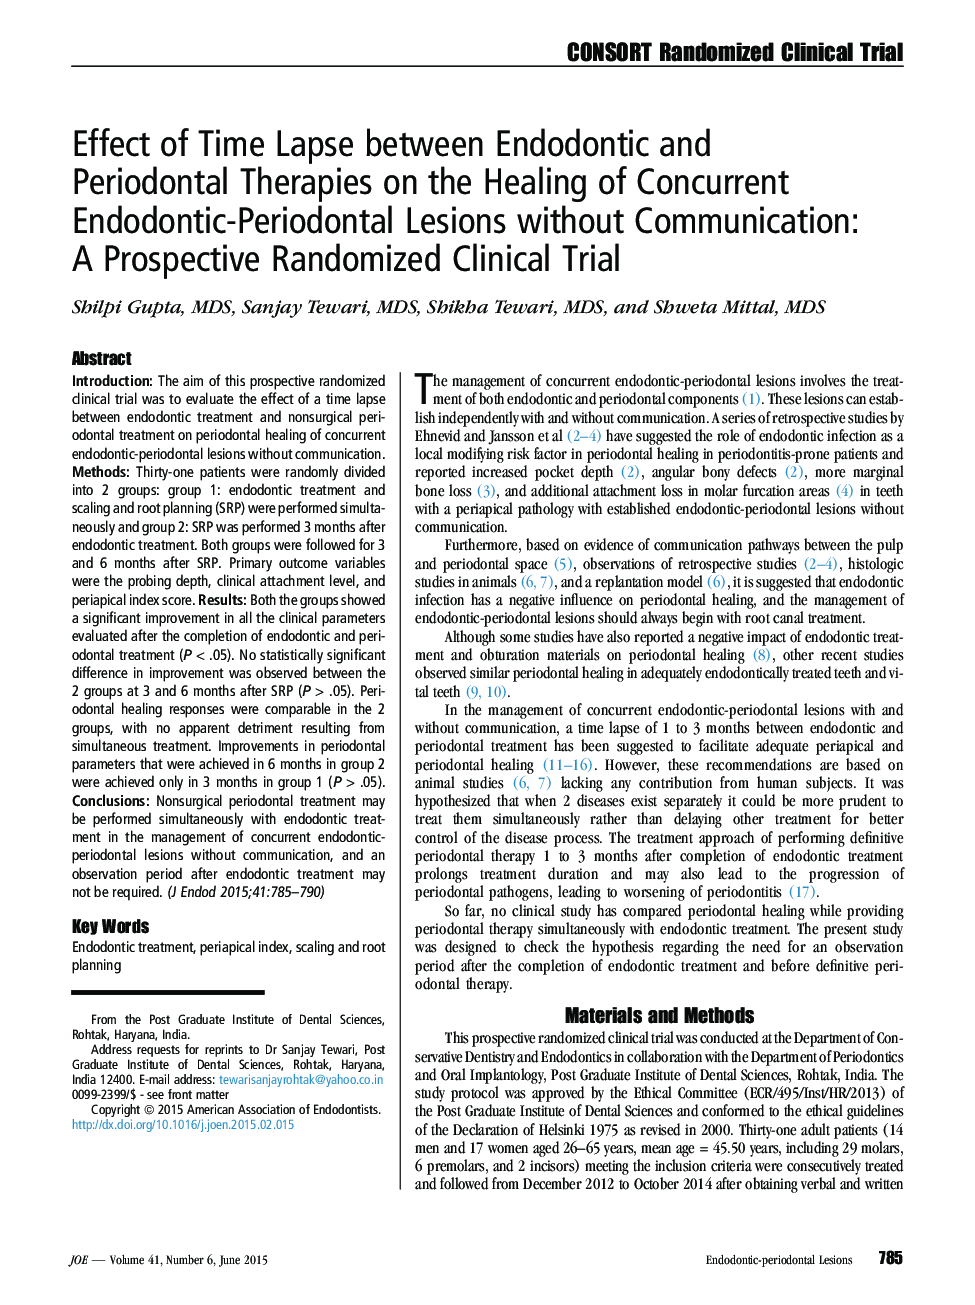 Effect of Time Lapse between Endodontic and Periodontal Therapies on the Healing of Concurrent Endodontic-Periodontal Lesions without Communication: A Prospective Randomized Clinical Trial